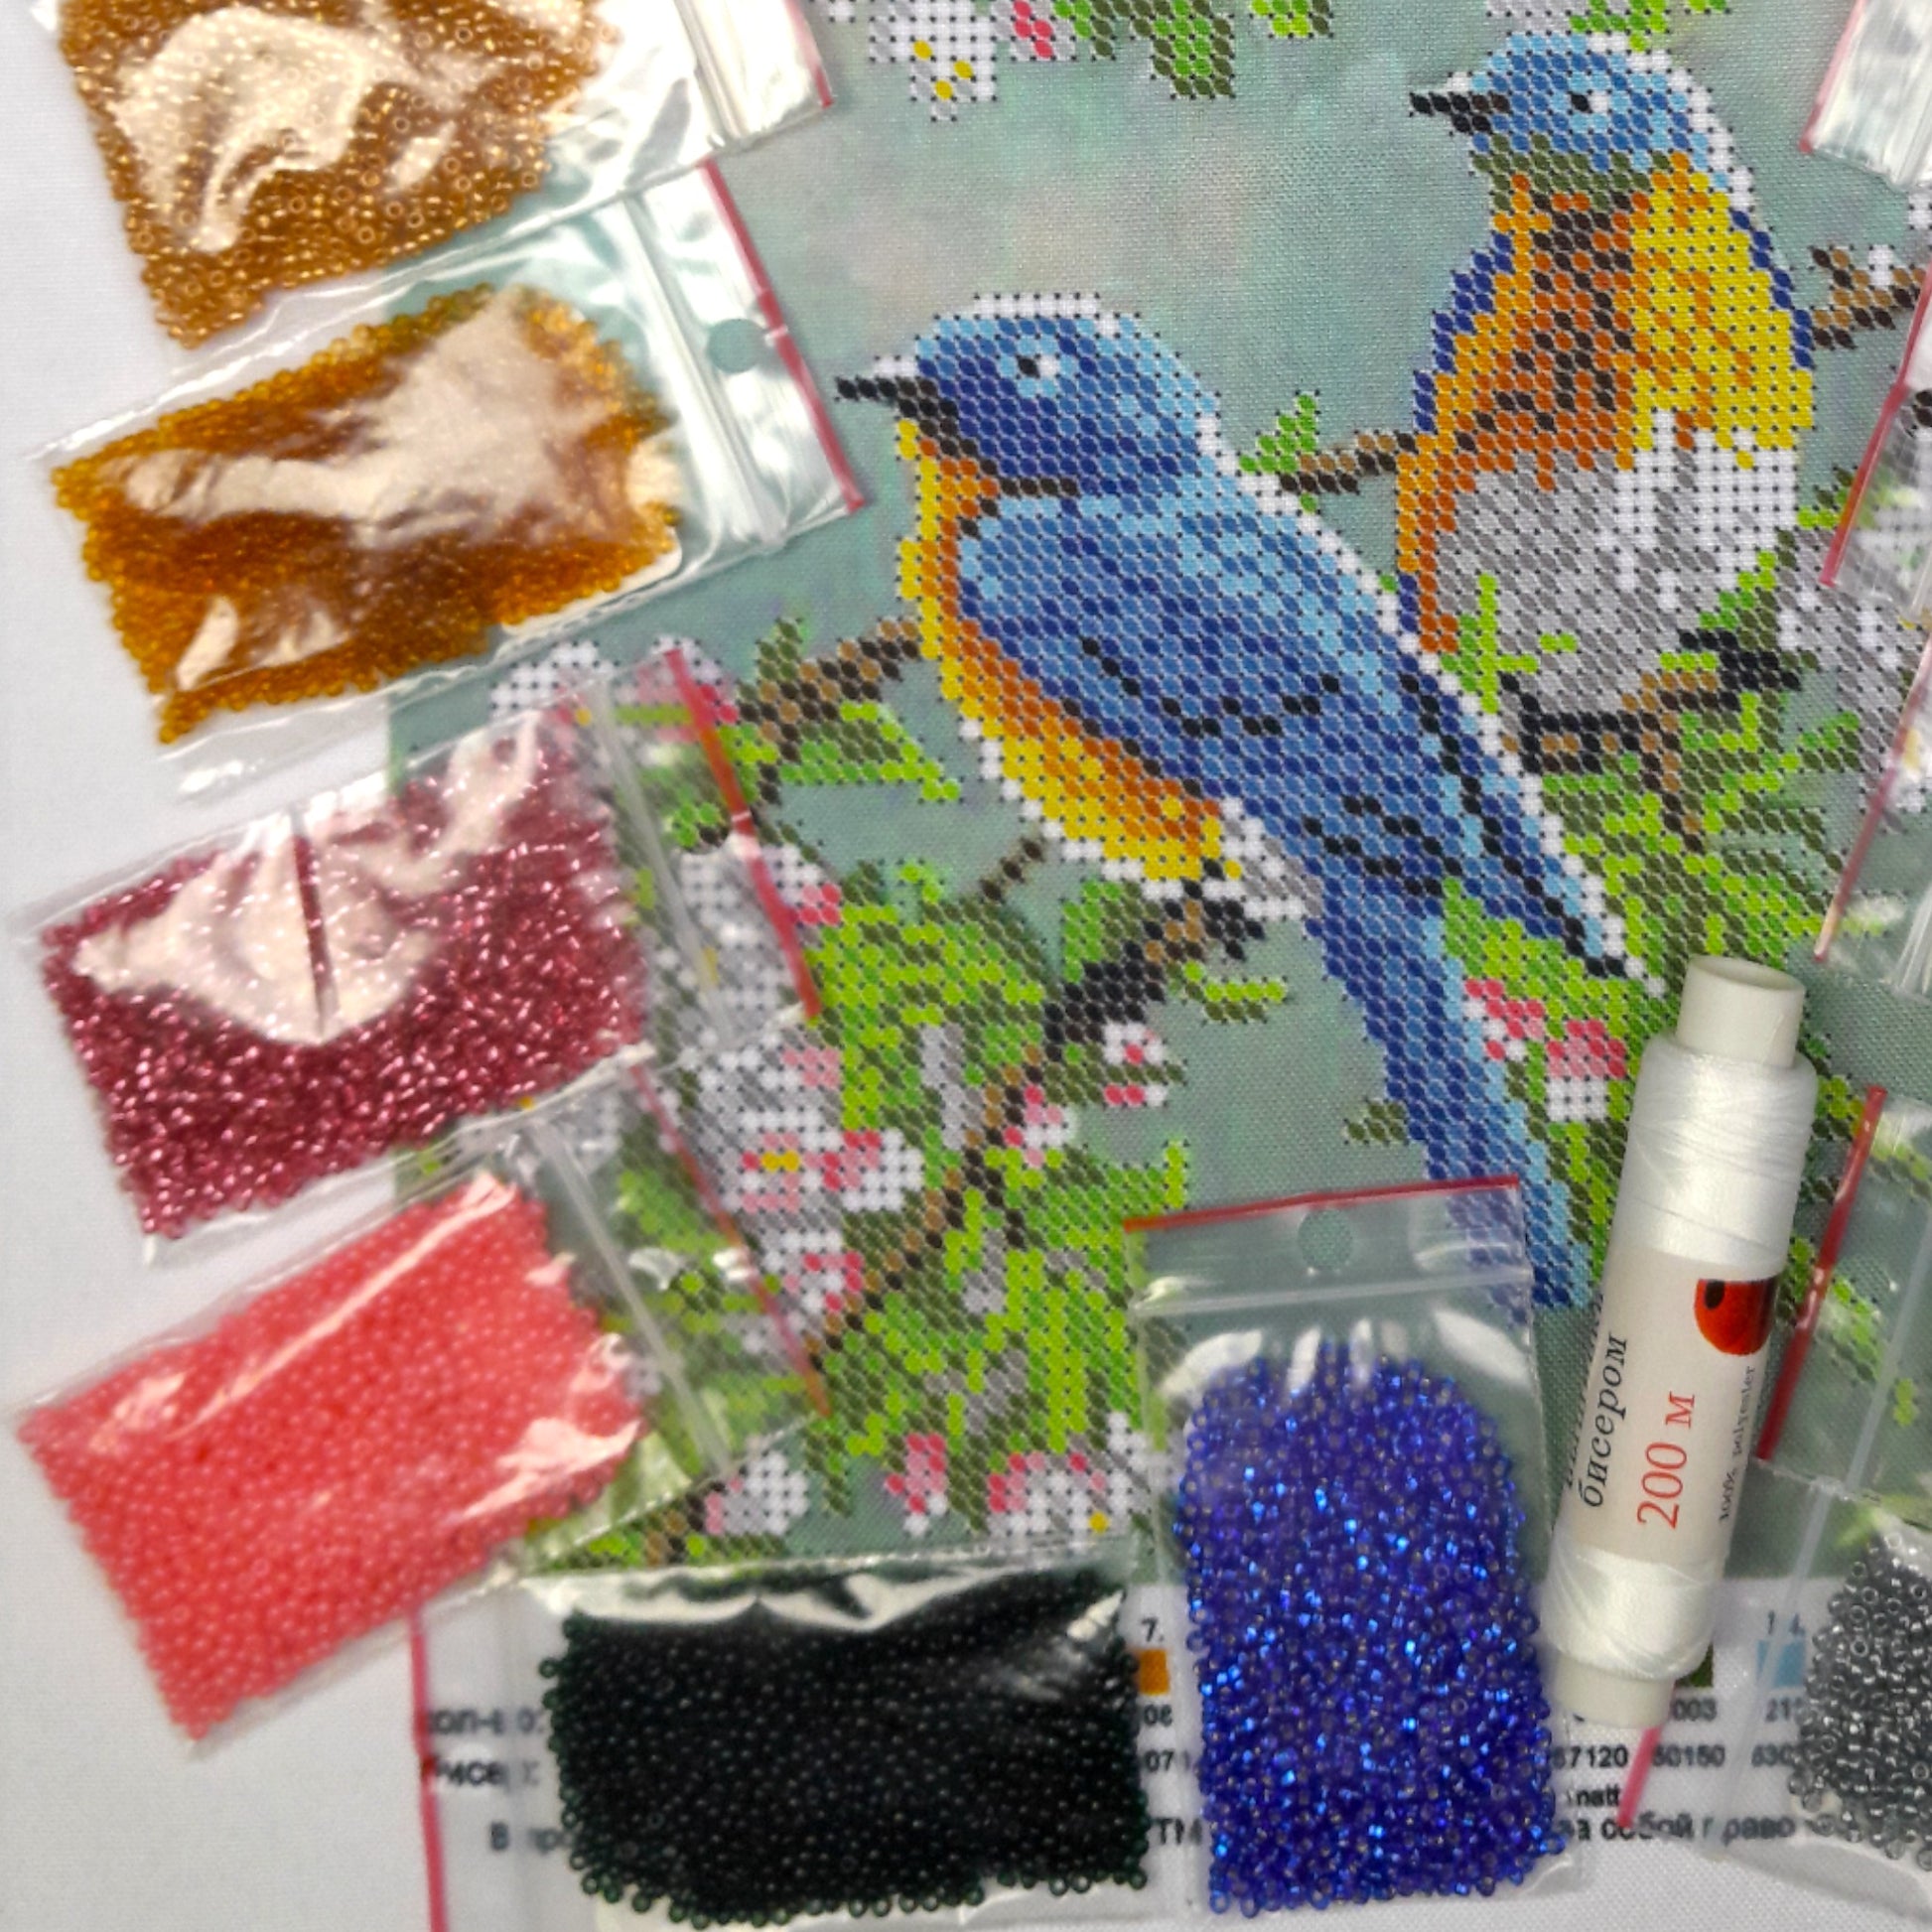 Bead embroidery kit "Bing song spring". Size: 8.3-11.0in (21-28cm) - VadymShop